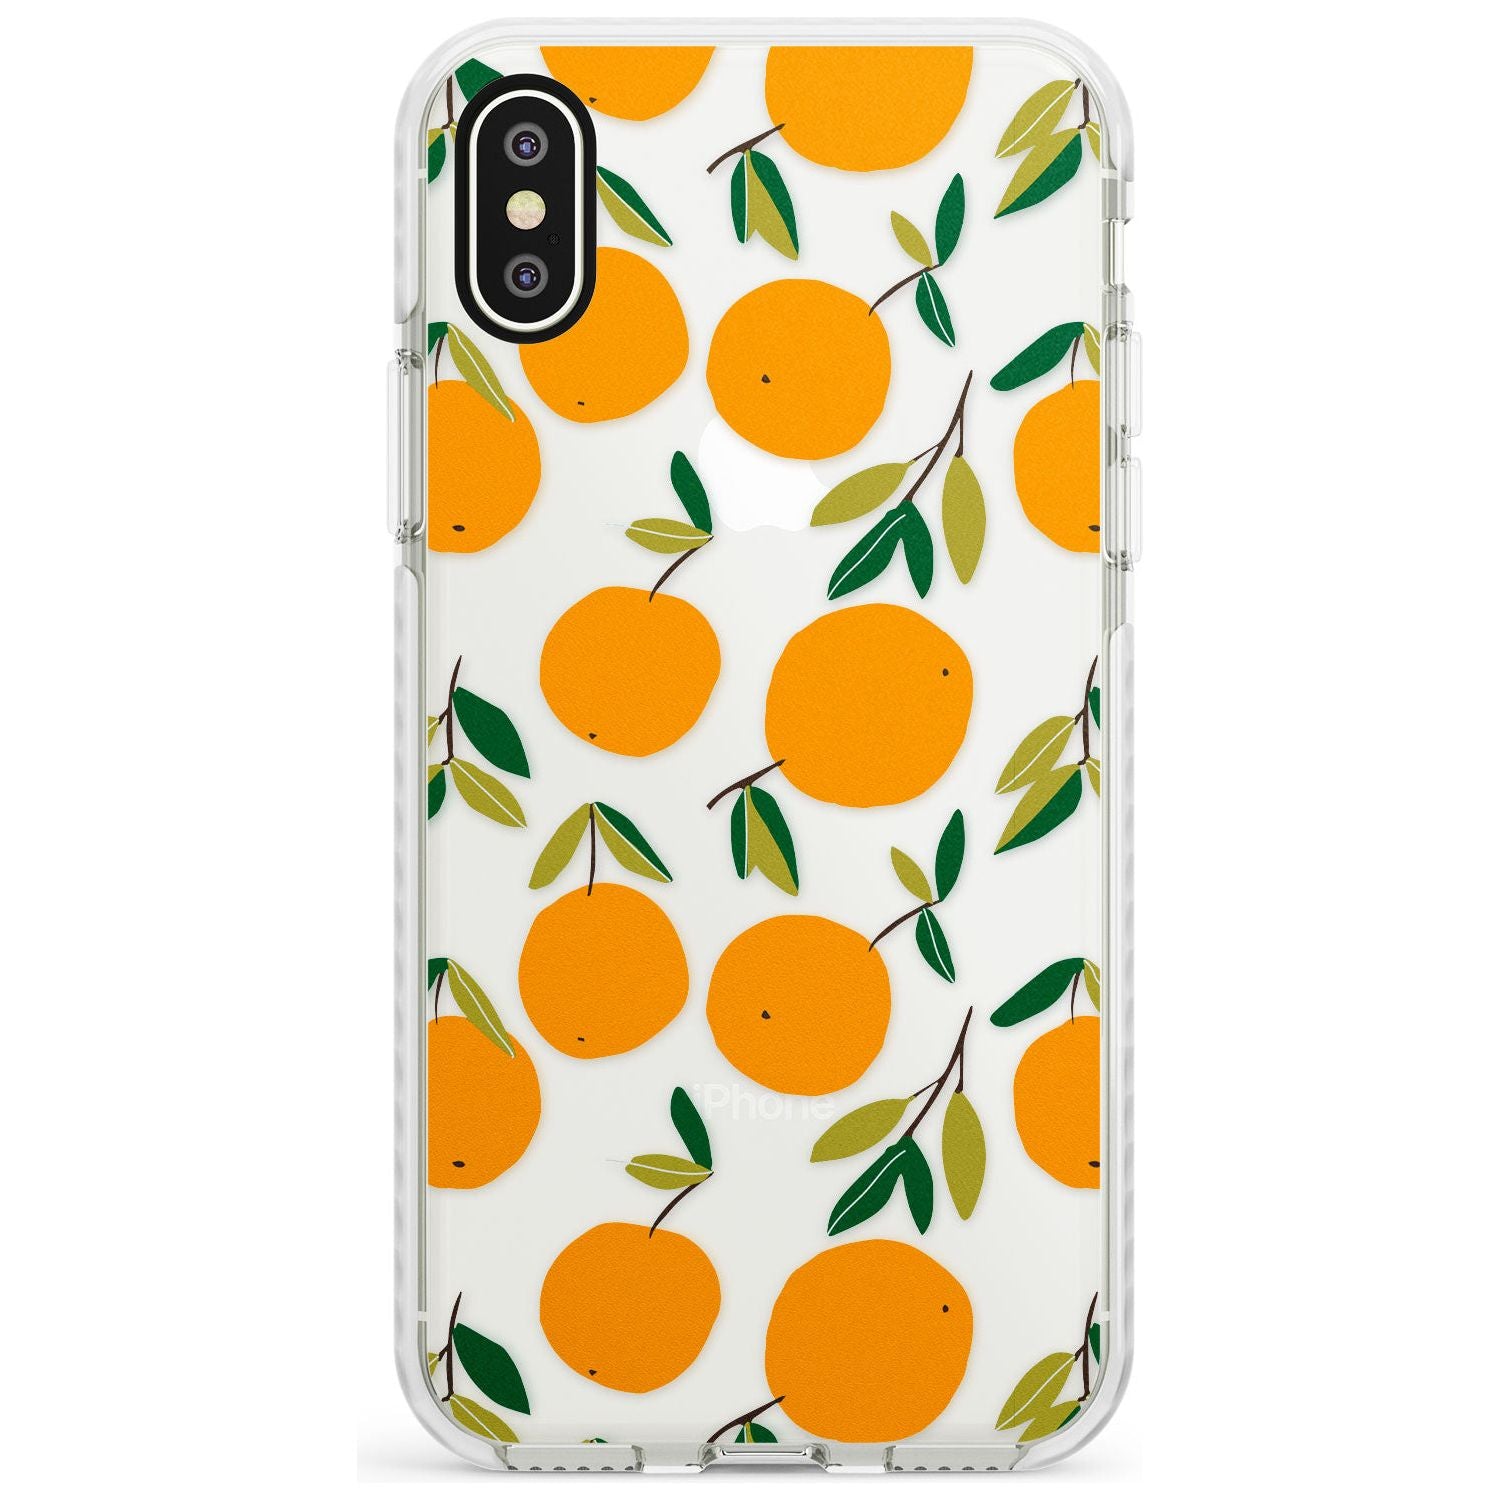 Oranges Pattern Impact Phone Case for iPhone X XS Max XR